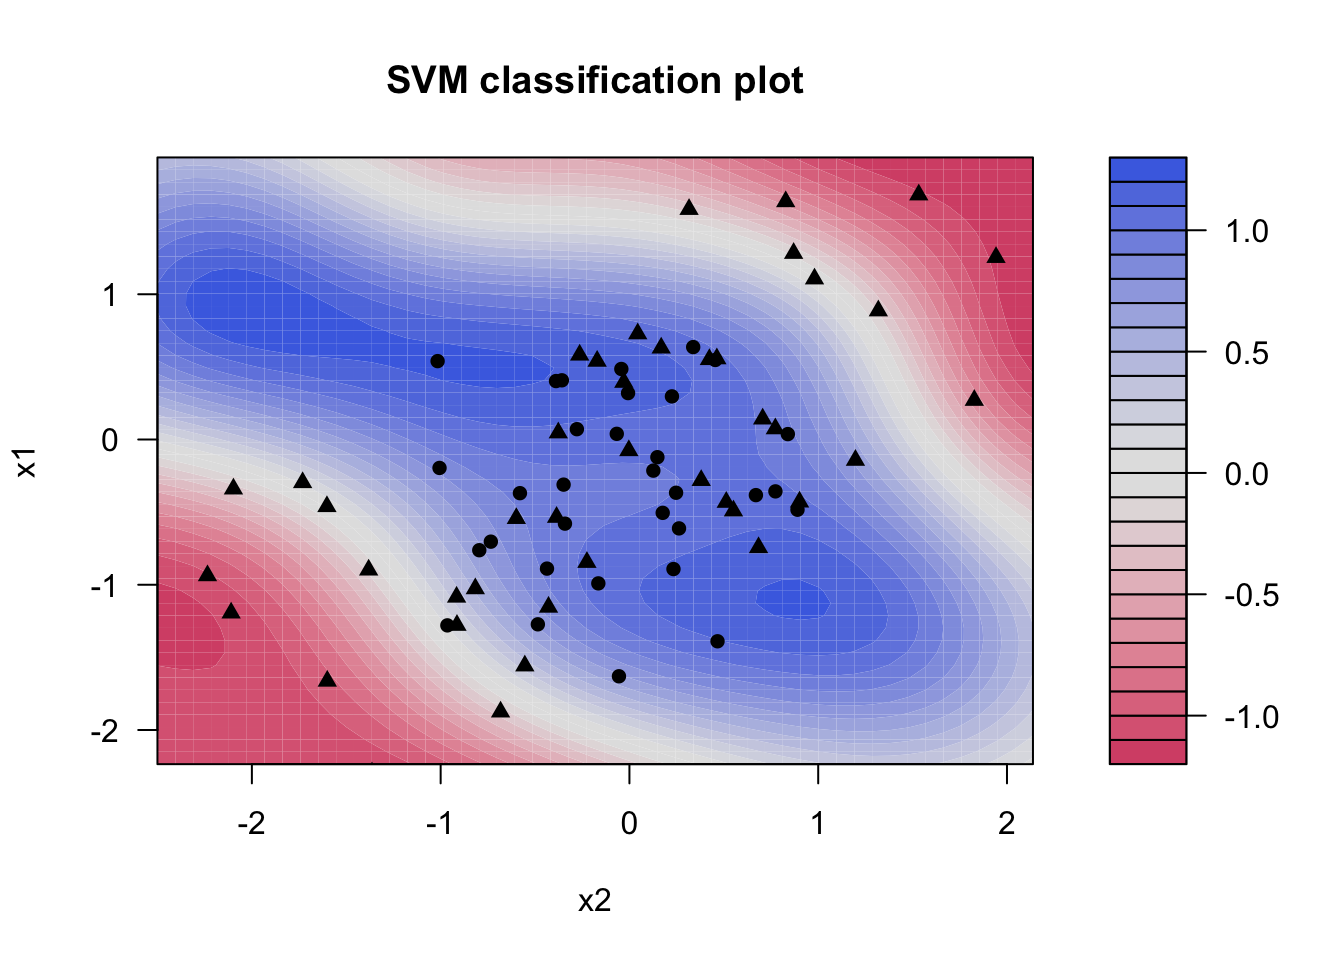 Scatter chart of sim_data with x2 on the x-axis and x1 on the y-axis. A gradient going from red through white to blue, is overlaid. The grading is blue in the middle of the data and red at the edges, with a non-linear seperation between the colors.